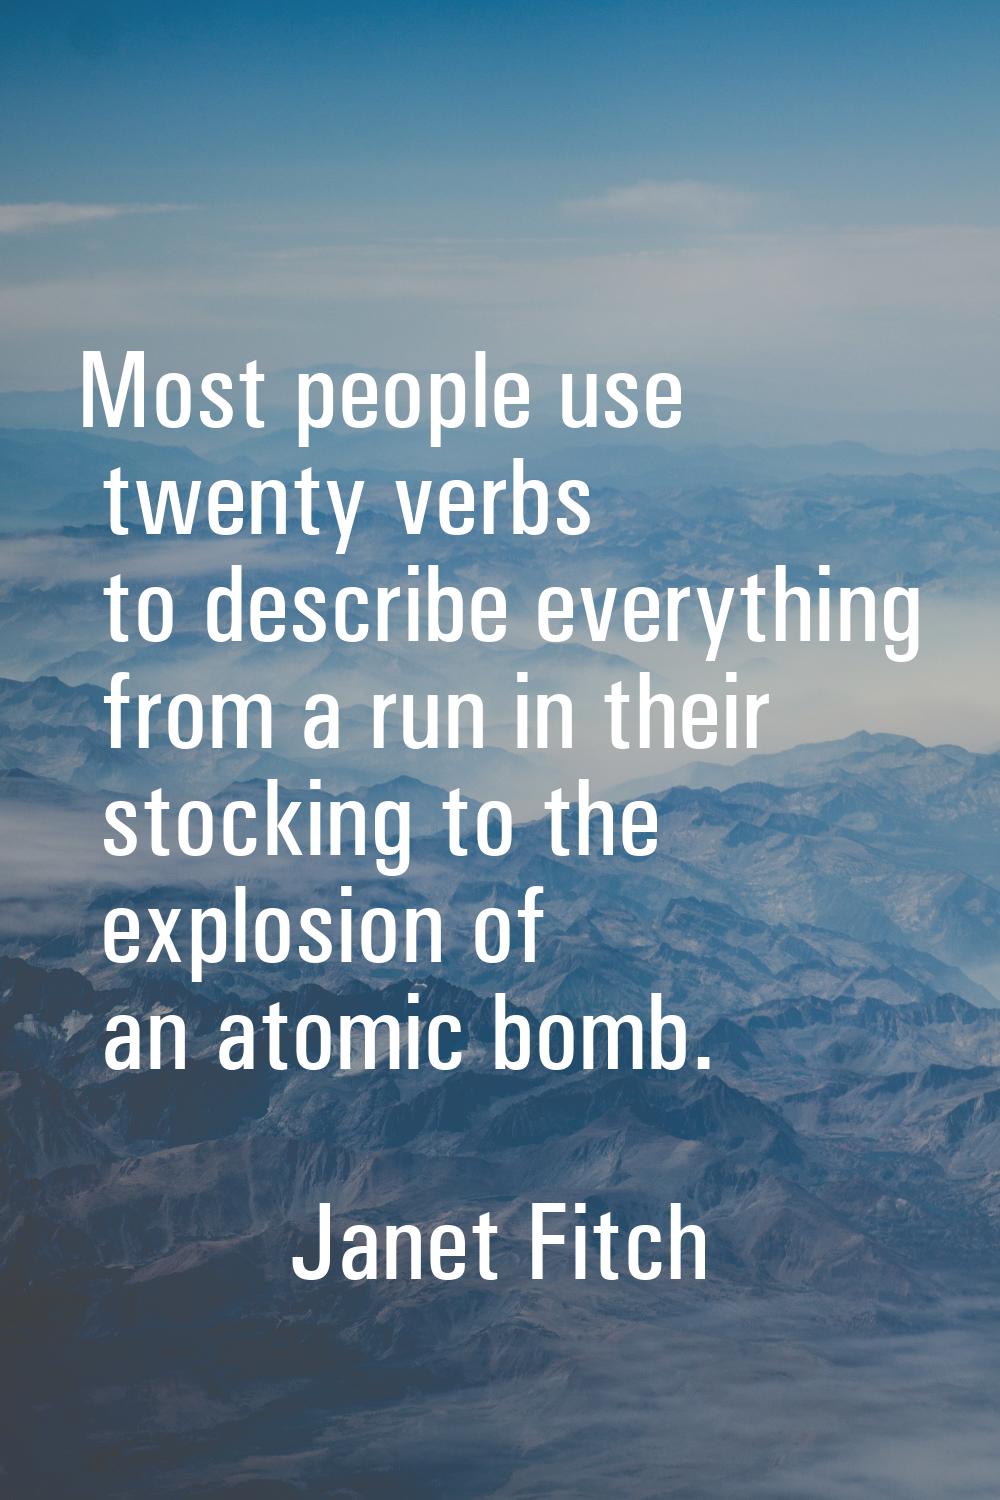 Most people use twenty verbs to describe everything from a run in their stocking to the explosion o